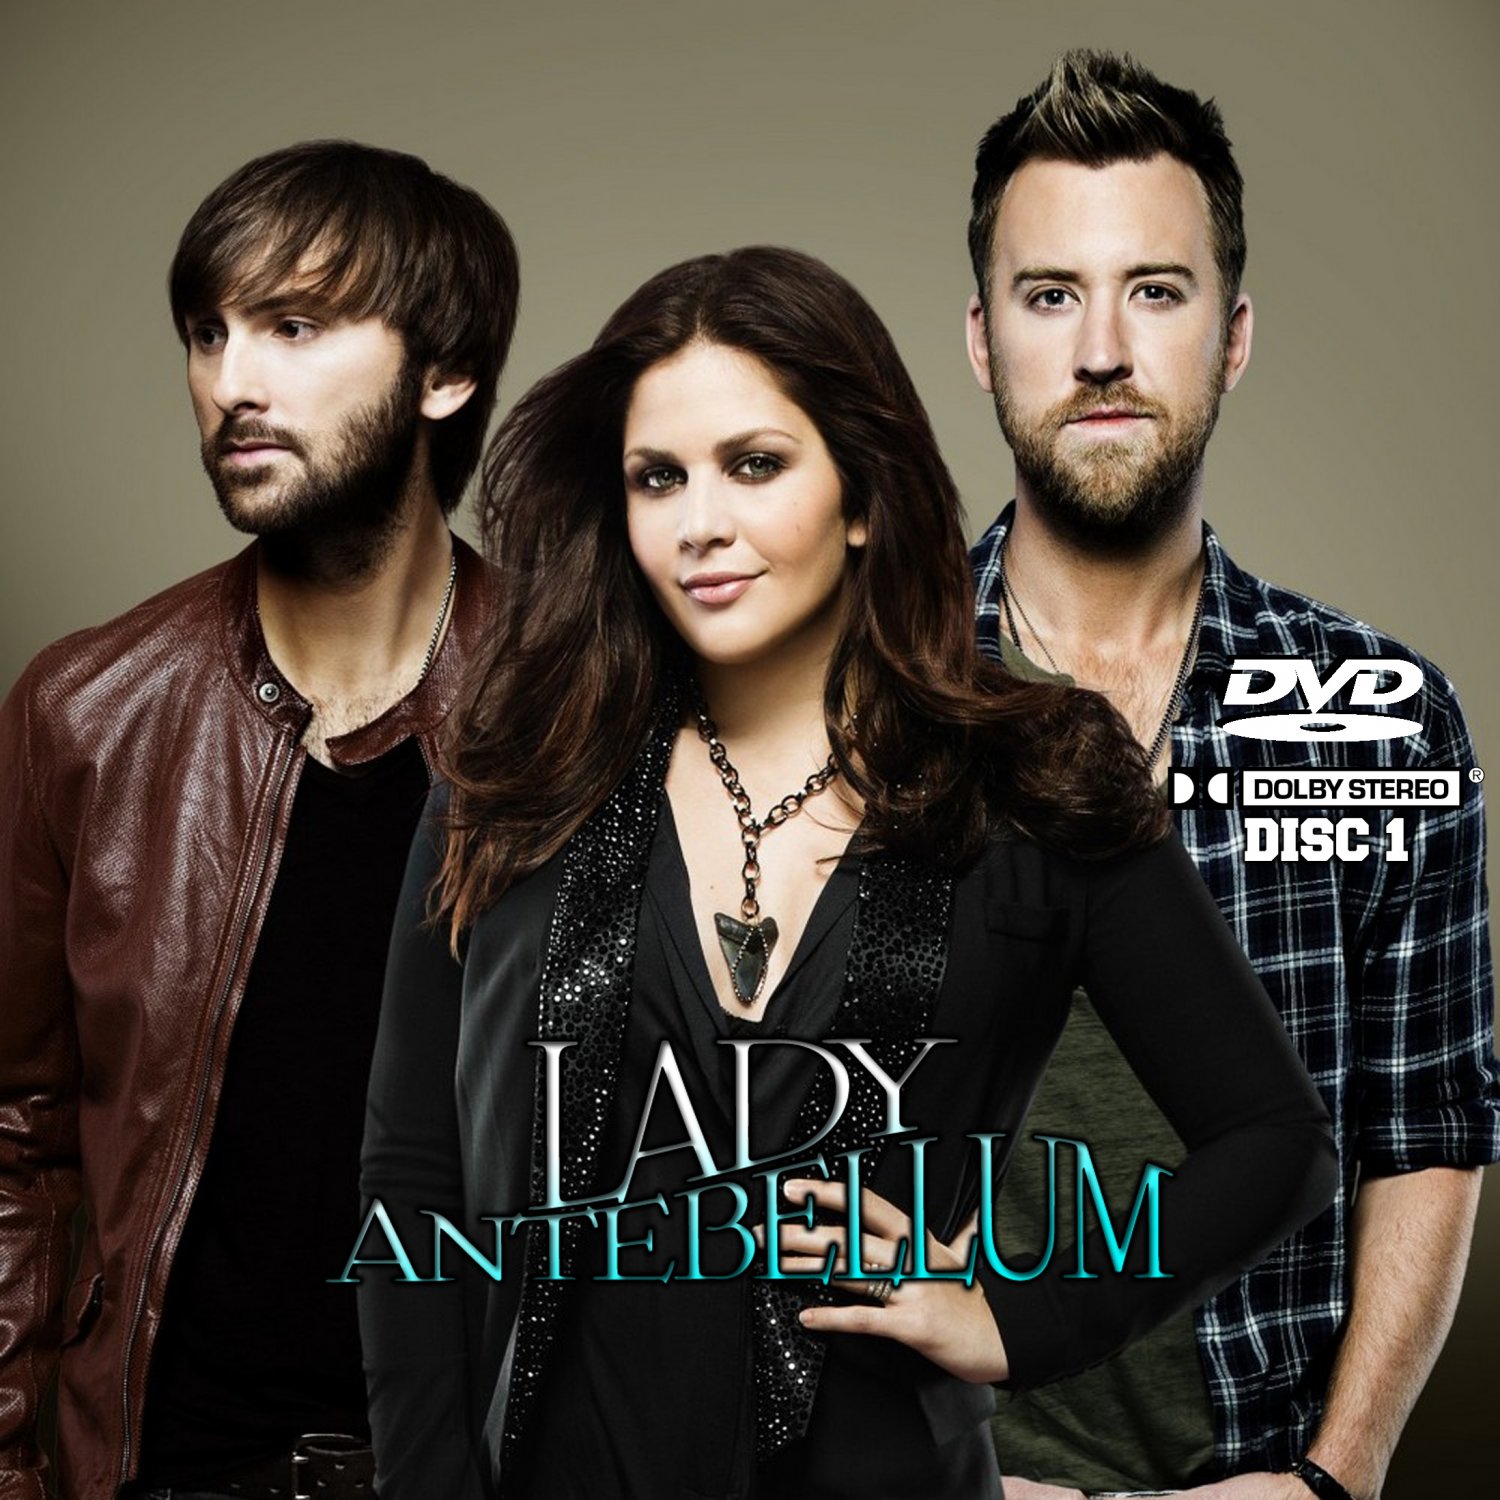 Lady Antebellum Music Videos Collection Lady A (2 DVD's) 39 Music Videos